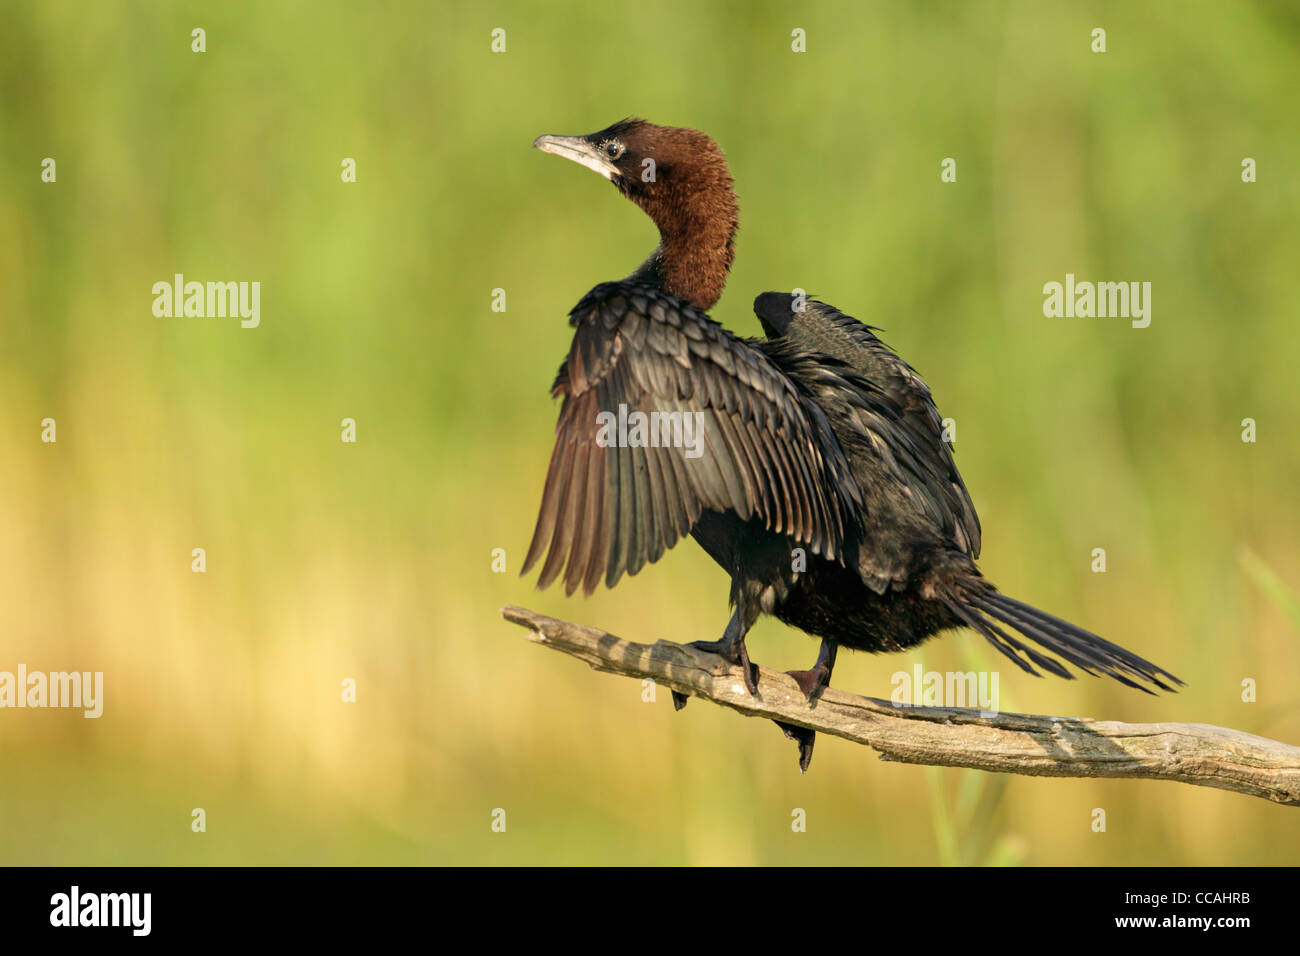 Pygmy cormorant (Phalacrocorax pygmeus) perched on a small log over water with reeds behind. Side view with wings outstretched Stock Photo